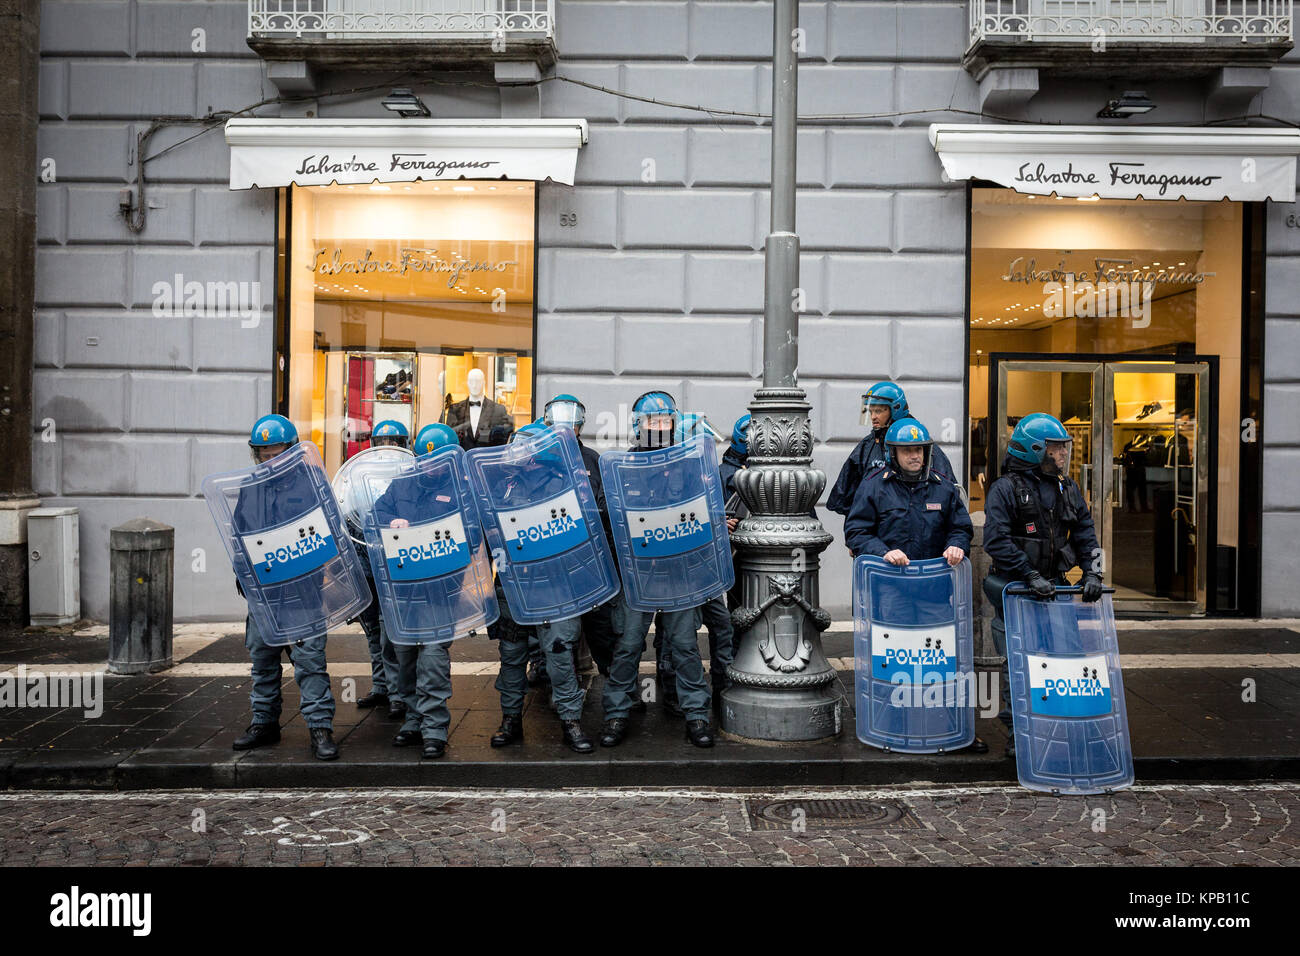 Naples, Italy. 15th Dec, 2017. On the occasion of the convocation of the Minister General of the School-Work Alternation in Rome by the Minister Fedeli, with the aim of making a balance of the first three years, students from all over Italy took to the streets to protest against what is considered a useless scholastic business model. (Italy, Naples, December 15th, 2017) Credit: Independent Photo Agency/Alamy Live News Stock Photo